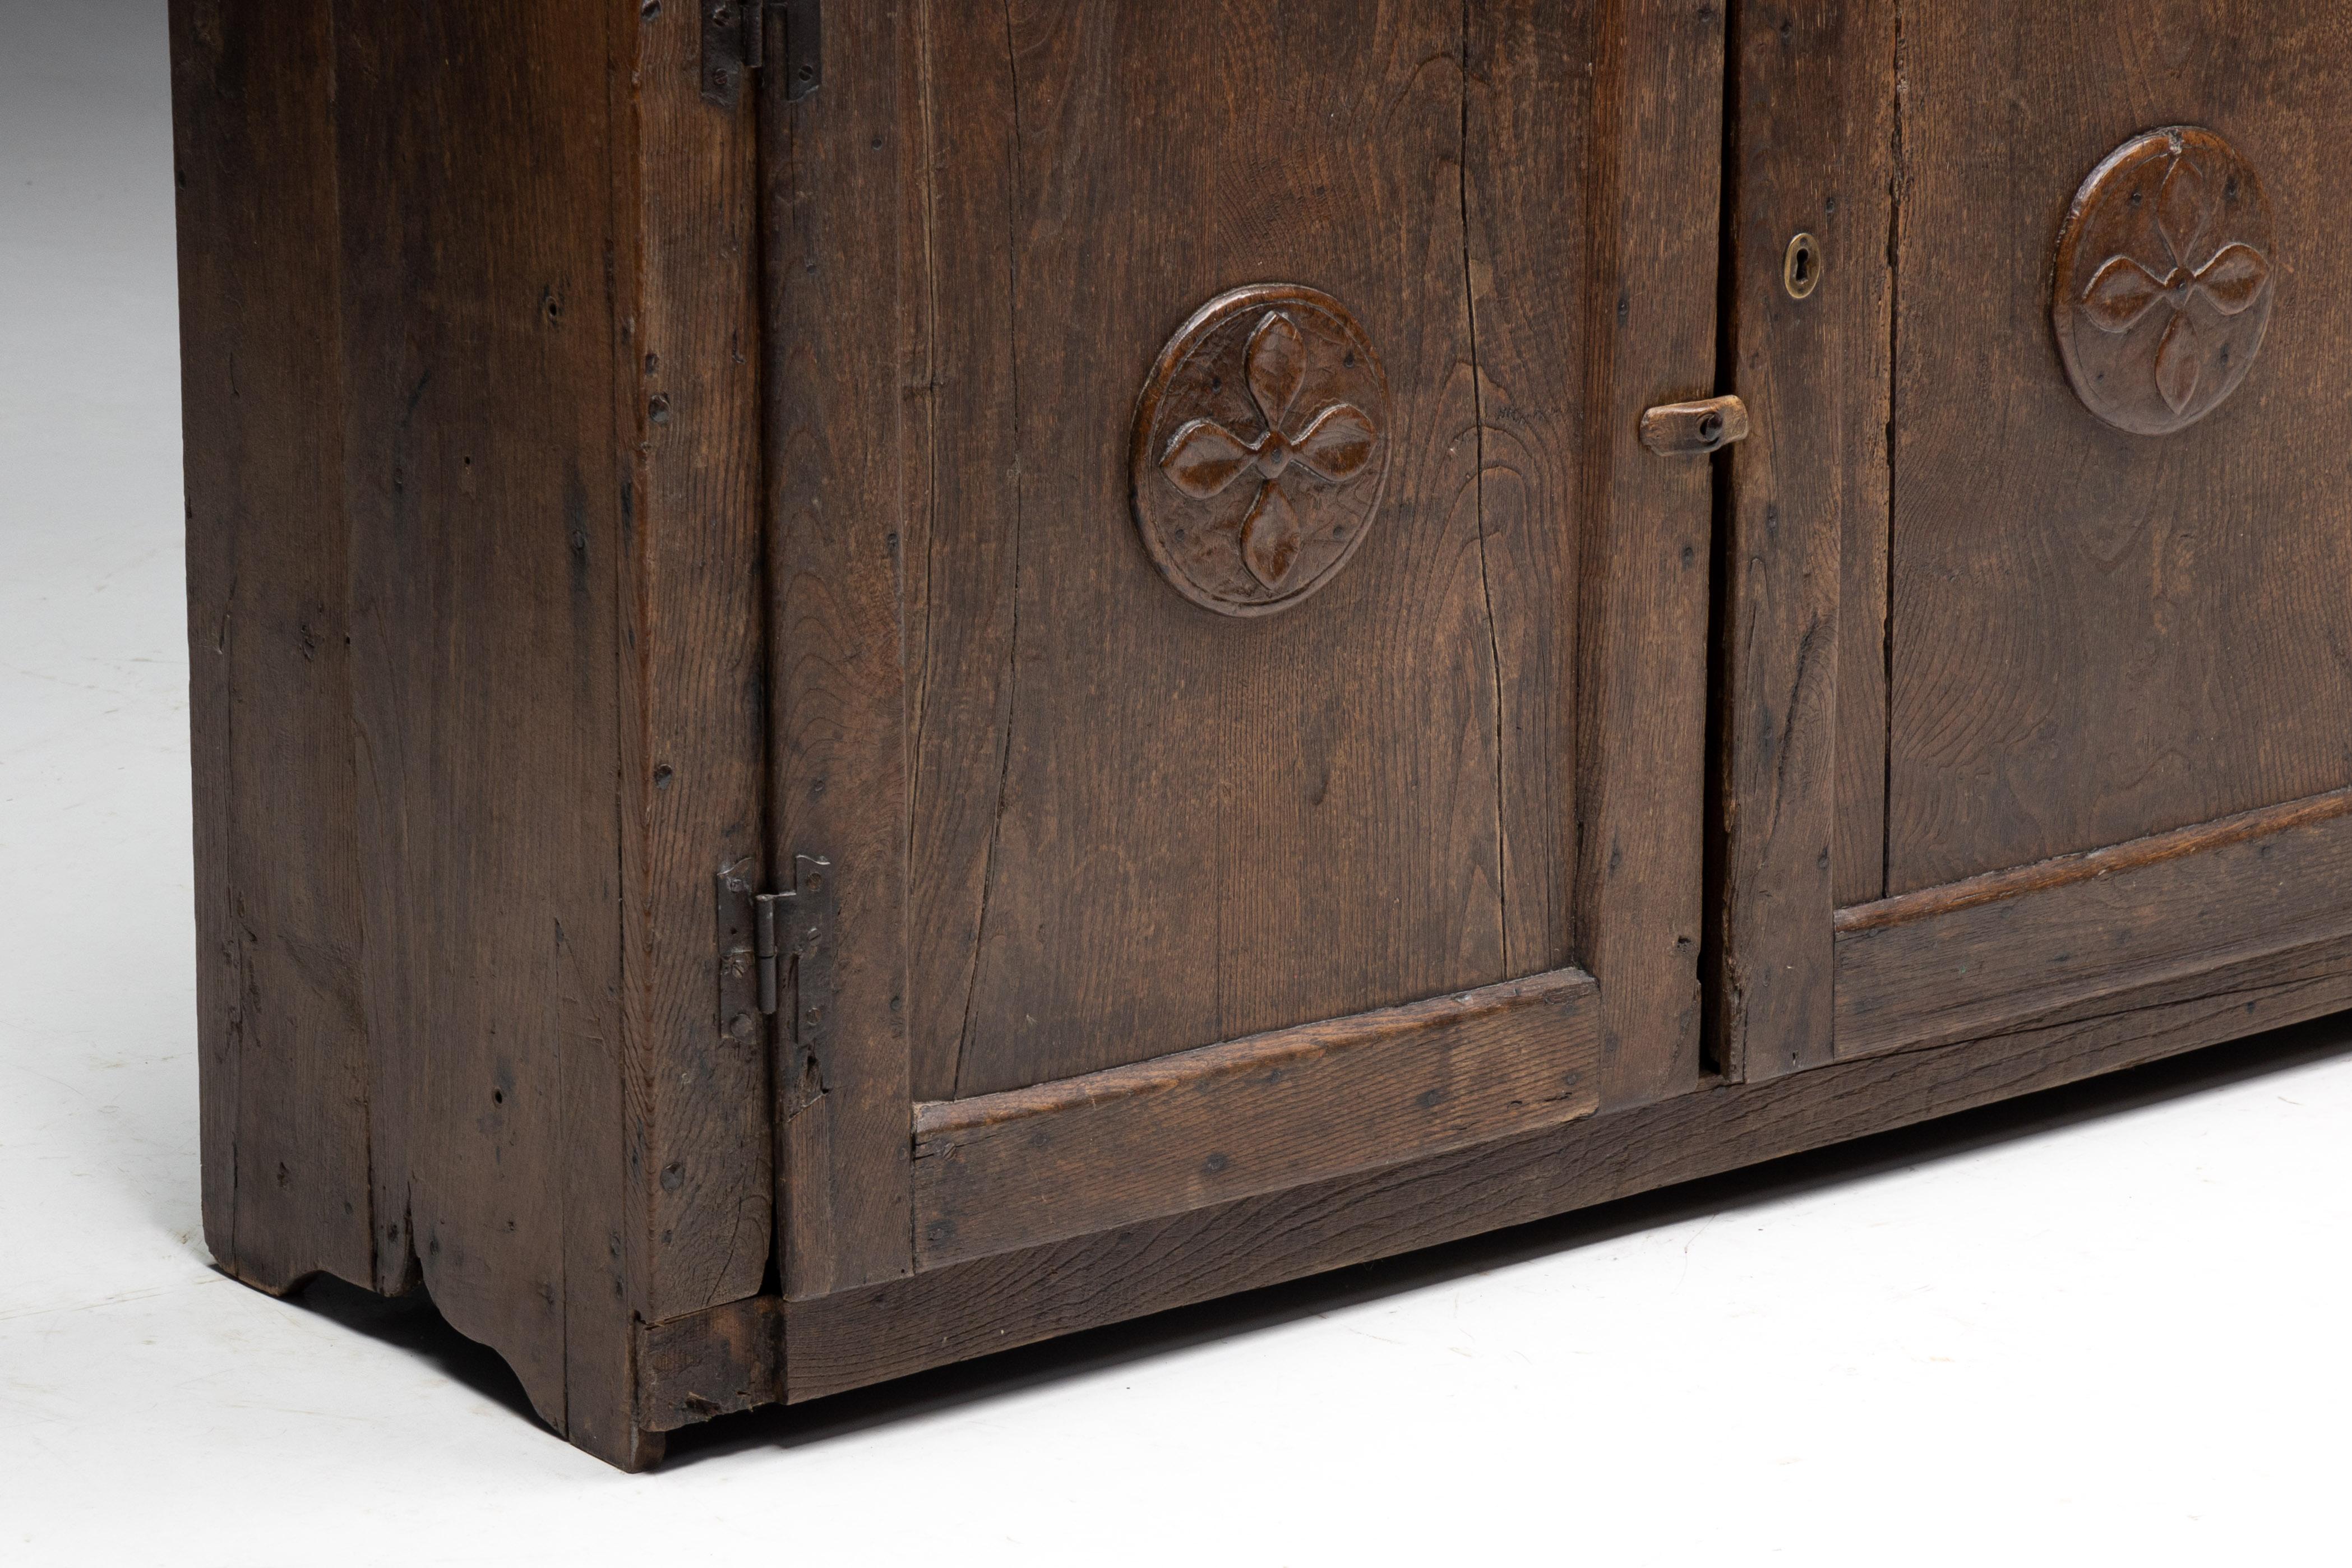 Wood Rustic Travail Populaire Cupboard, France, Early 19th Century For Sale